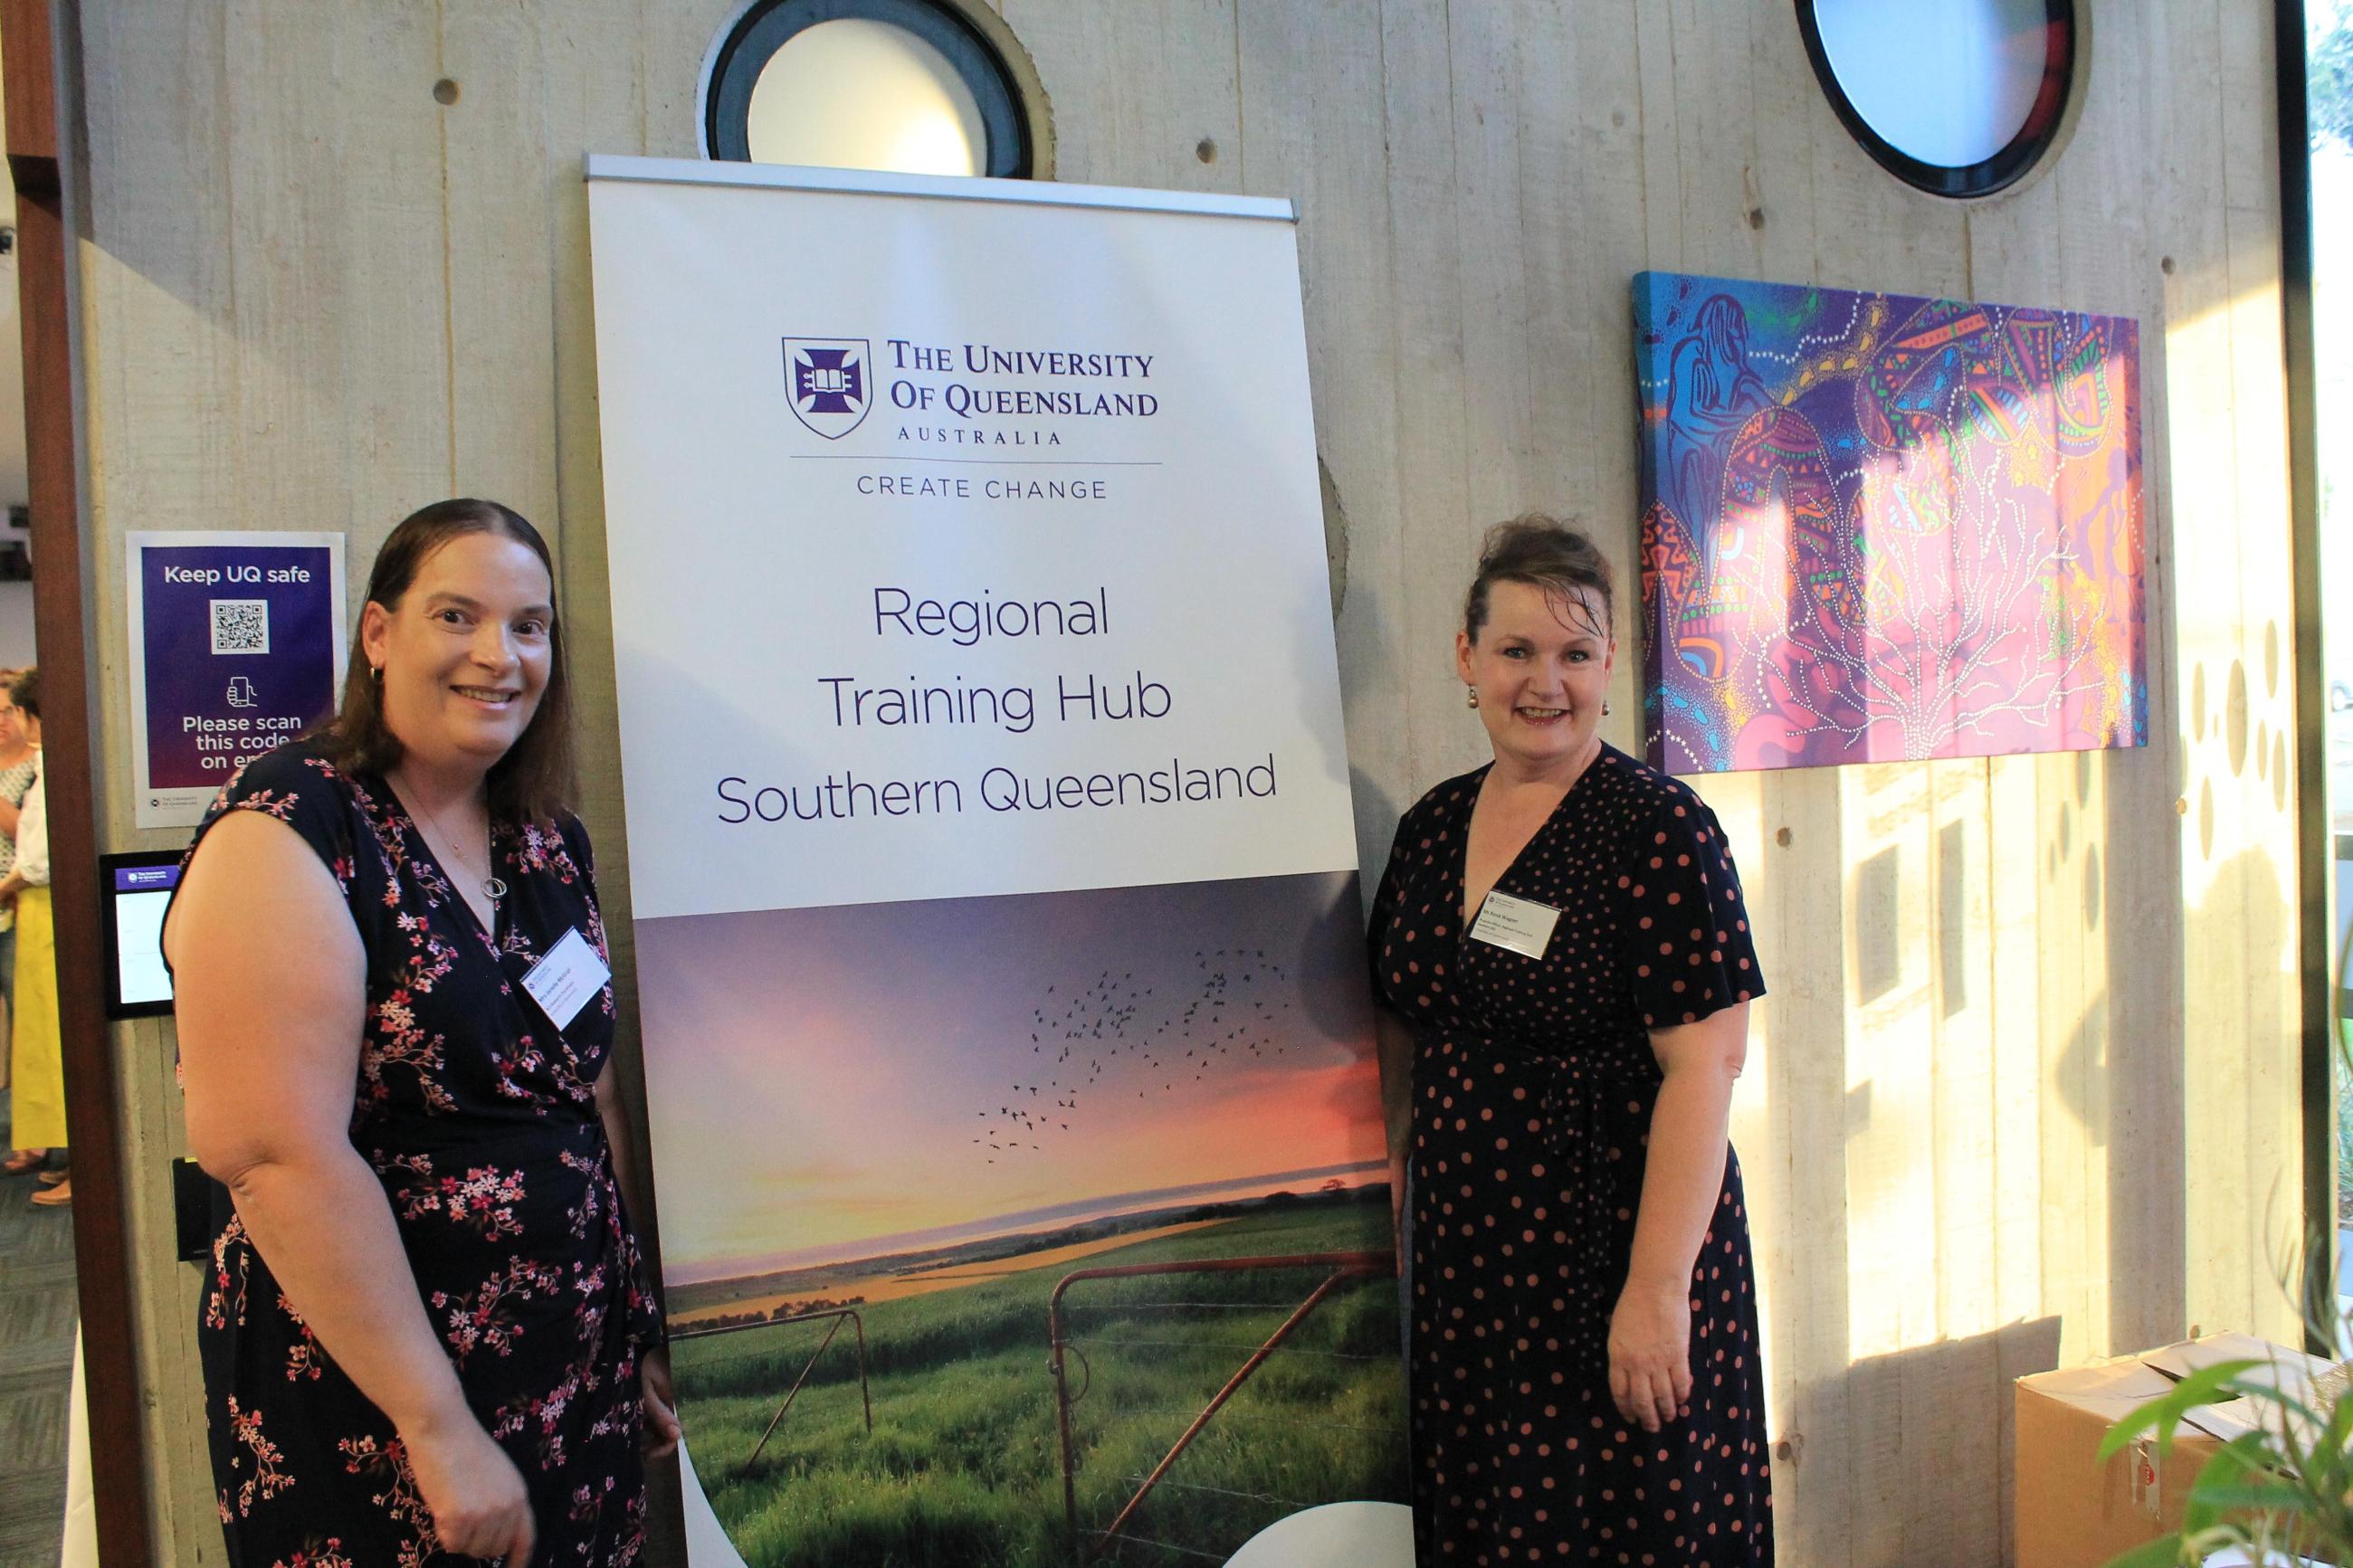 UQRCS Research Coordinator Janelle McGrail and UQRTH Southern Queensland Program Officer Rosie Wagner at the event. 